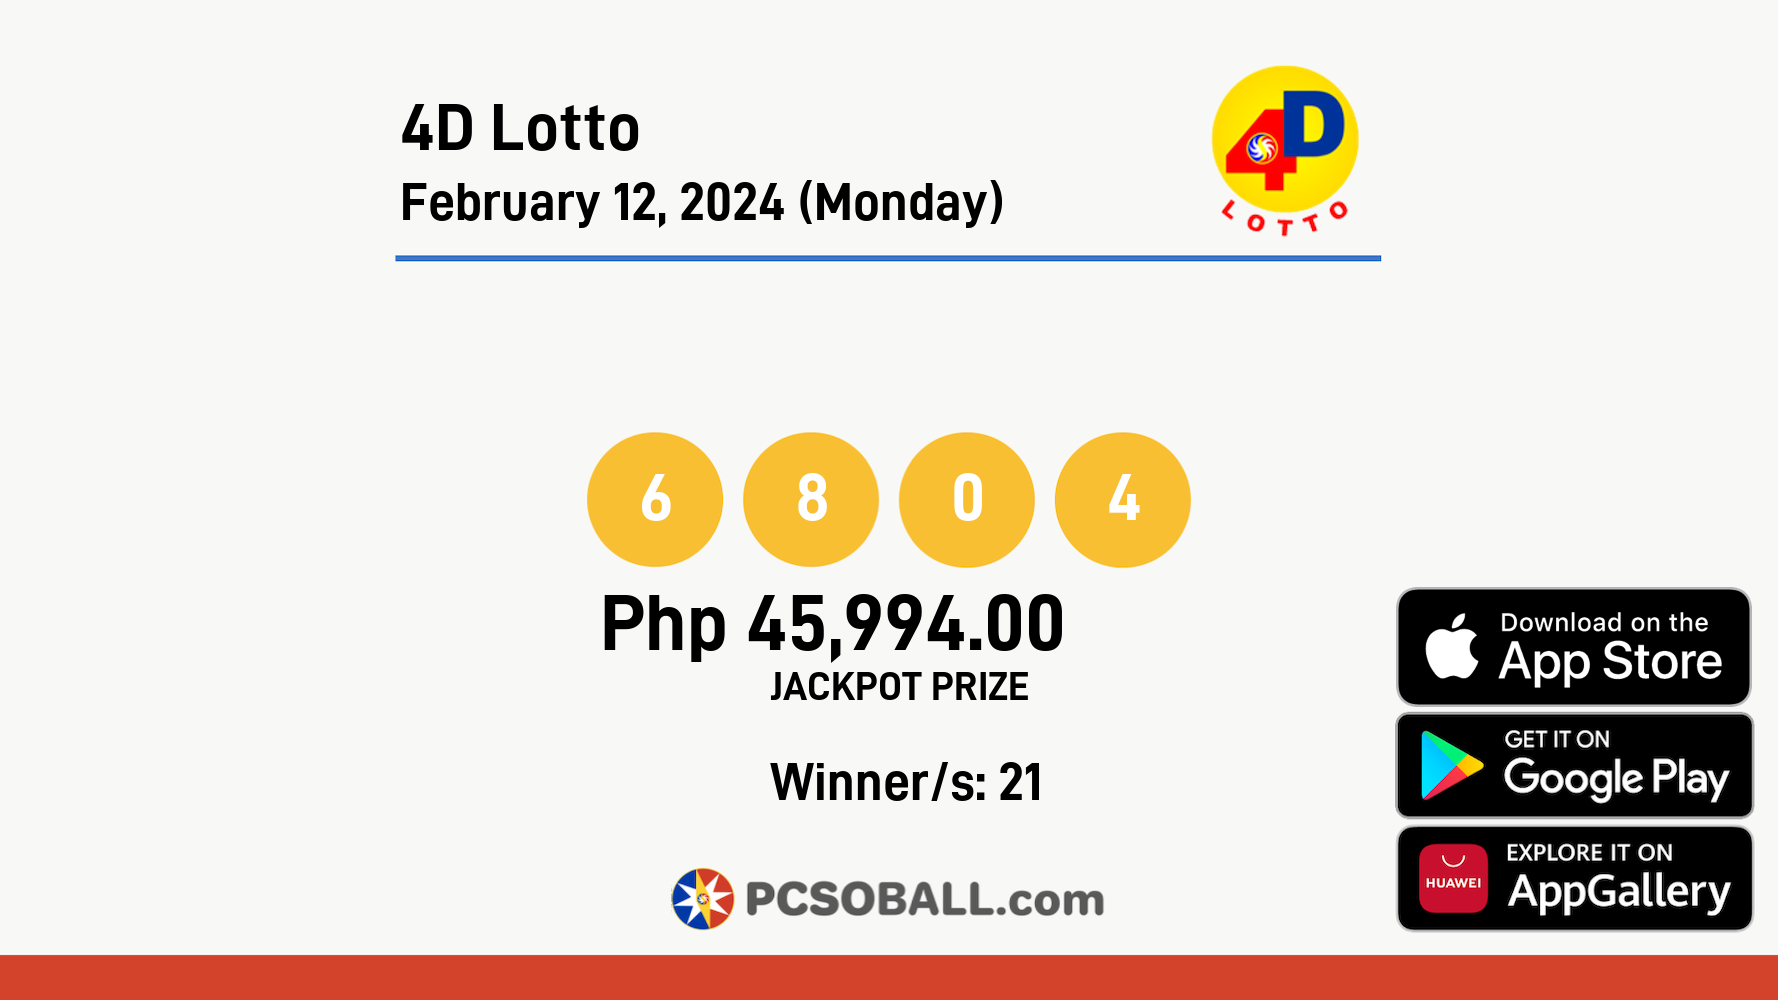 4D Lotto February 12, 2024 (Monday) Result